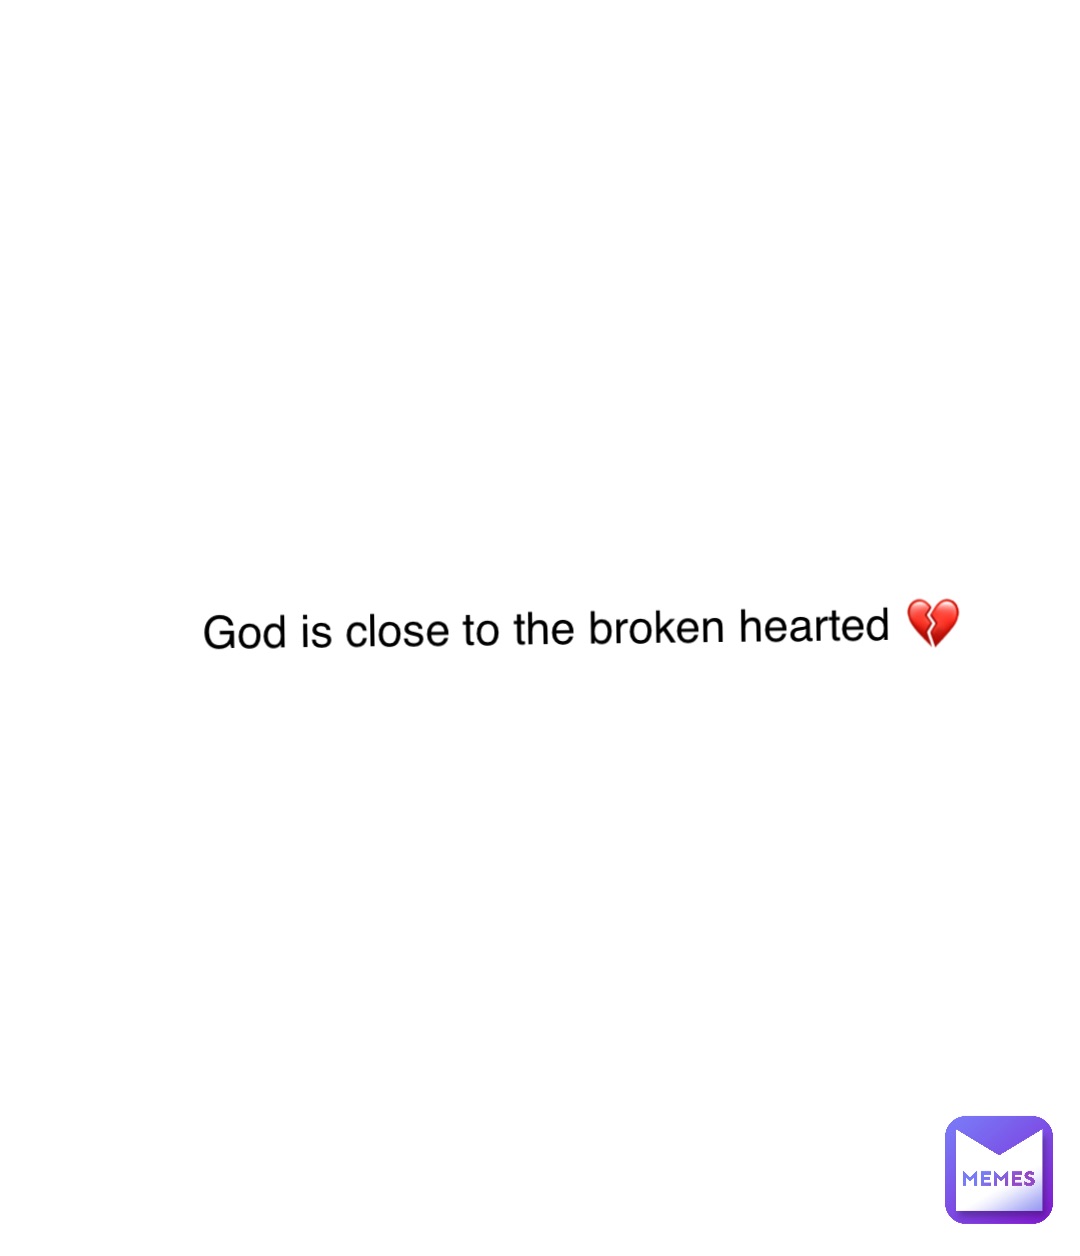 Double tap to edit God is close to the broken hearted 💔